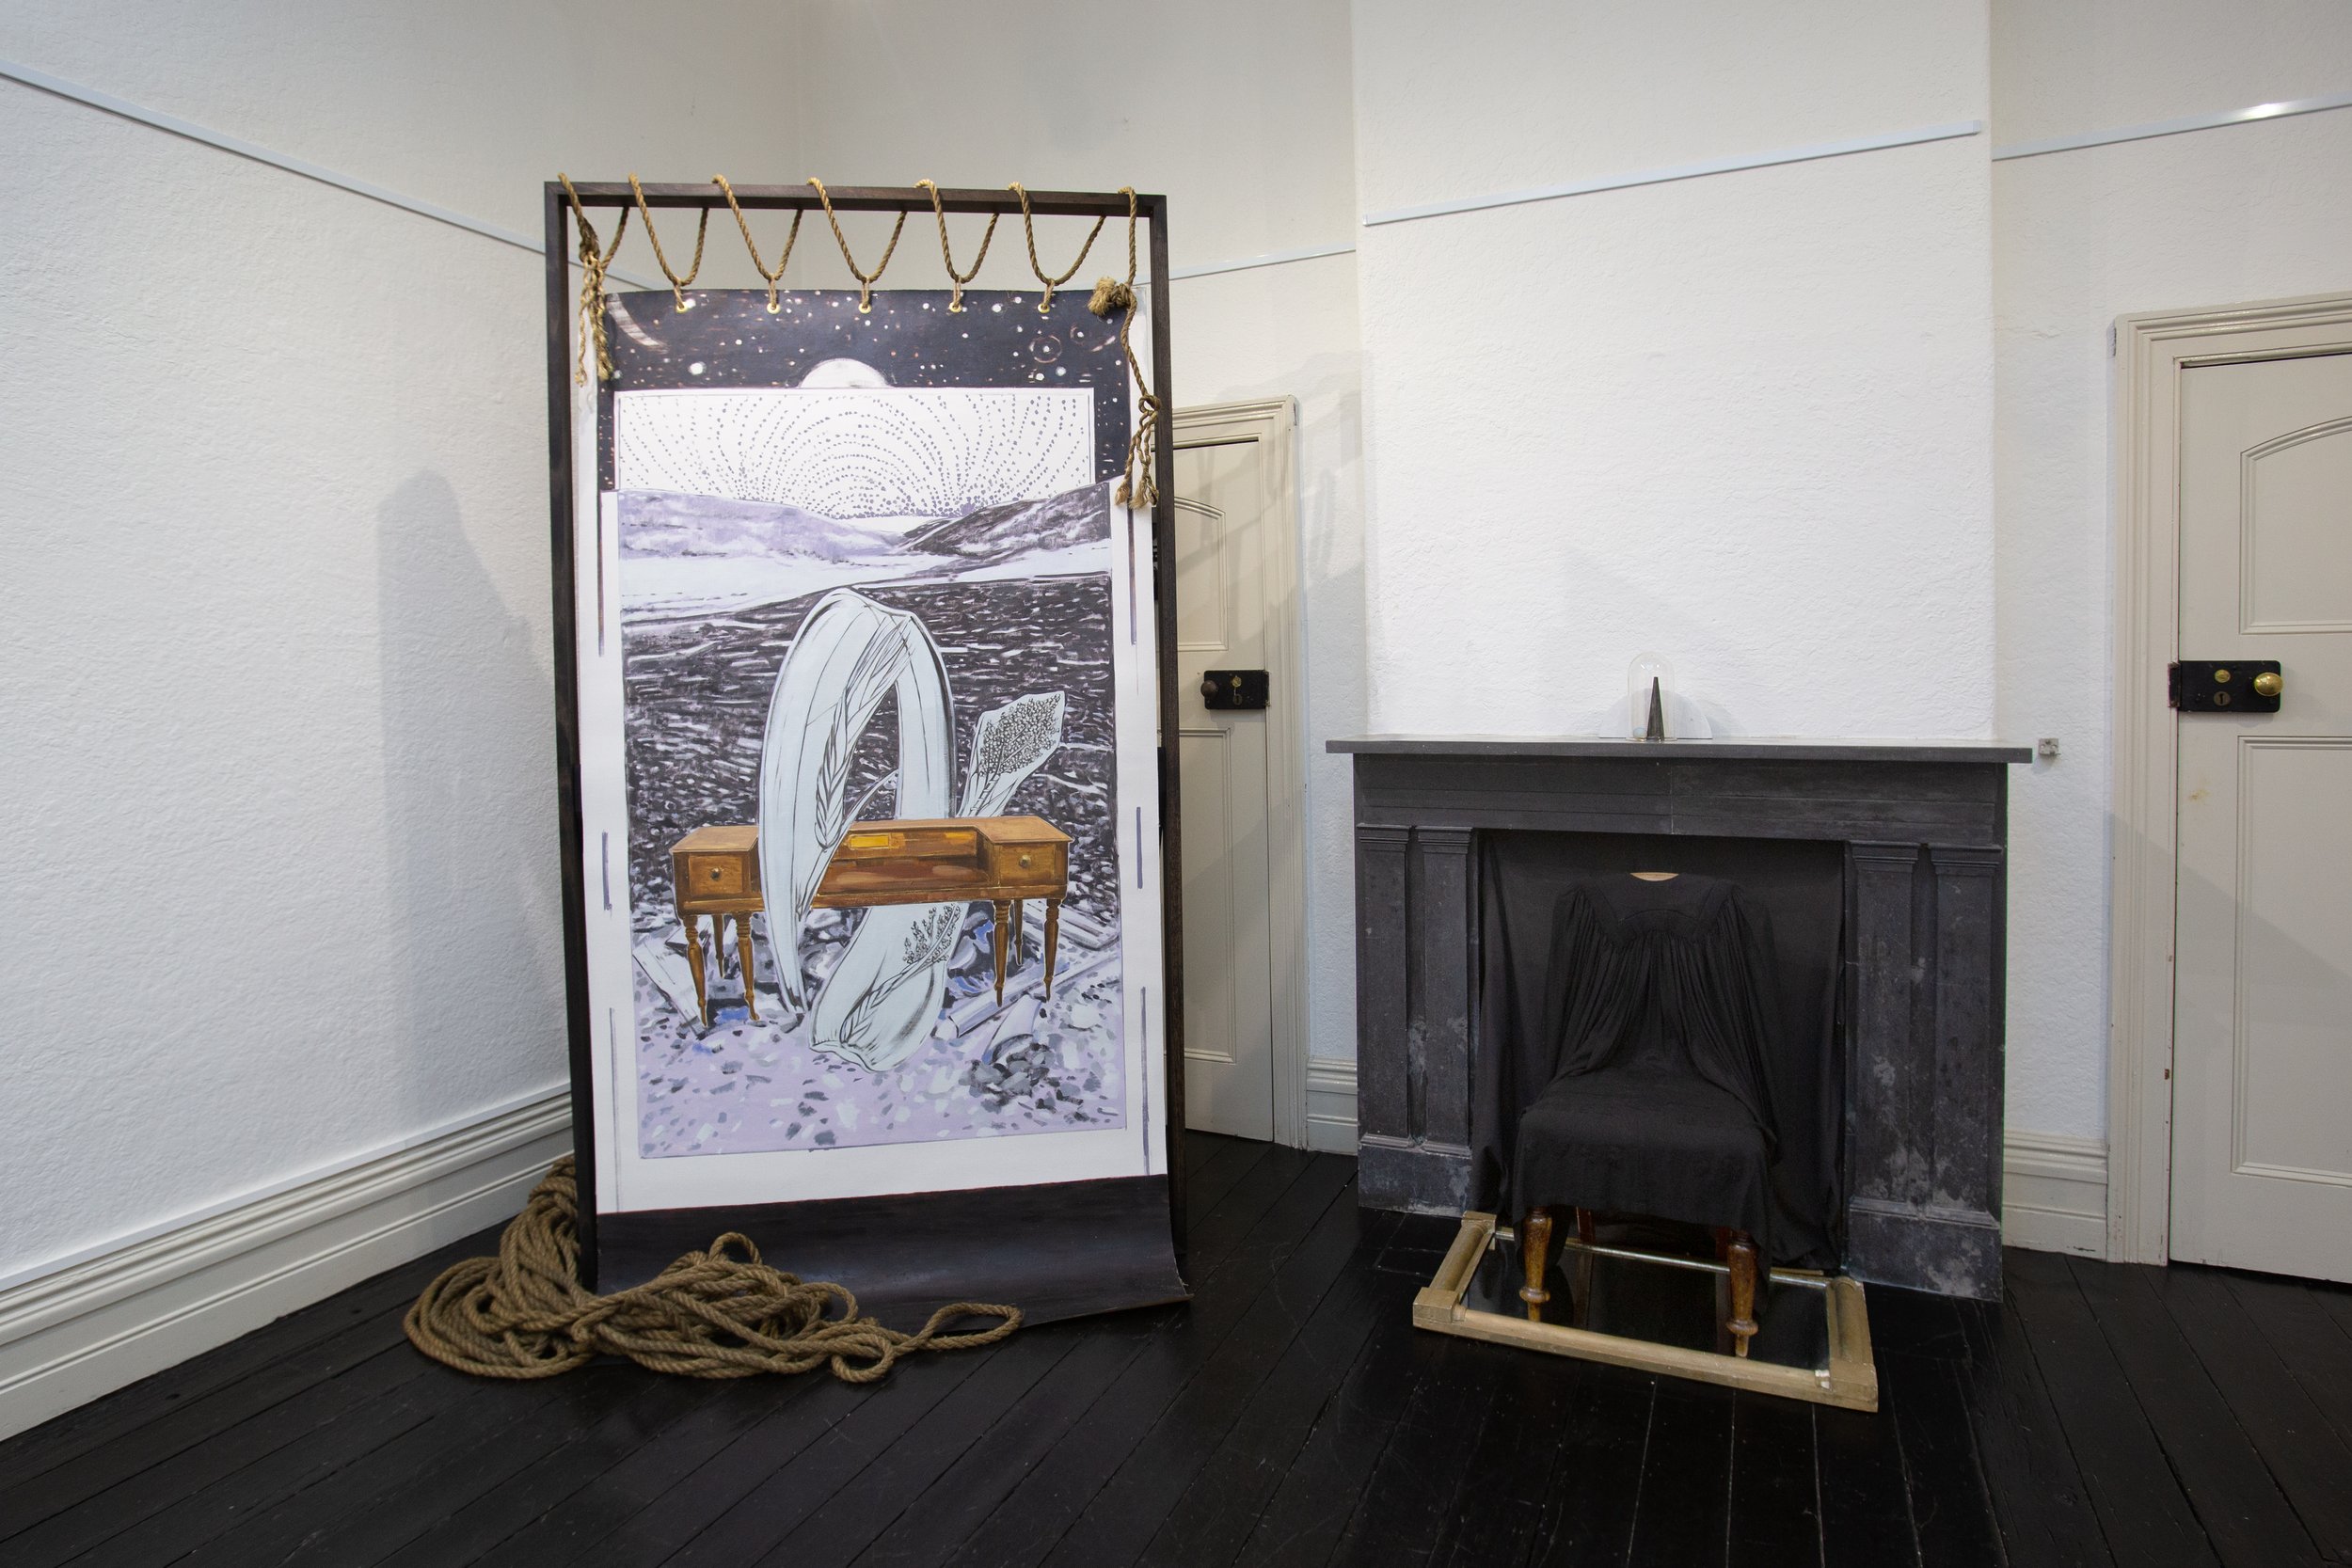  Jo Chew,  All mysteries and all knowledge , 2023, Oil on linen, Tas oak stand, antique rope, 250 x 130cm  Jo Chew,  Foul anchor , 2023, Chair, mirror, academic gown, cloth, embroidery thread, Dimensions variable   